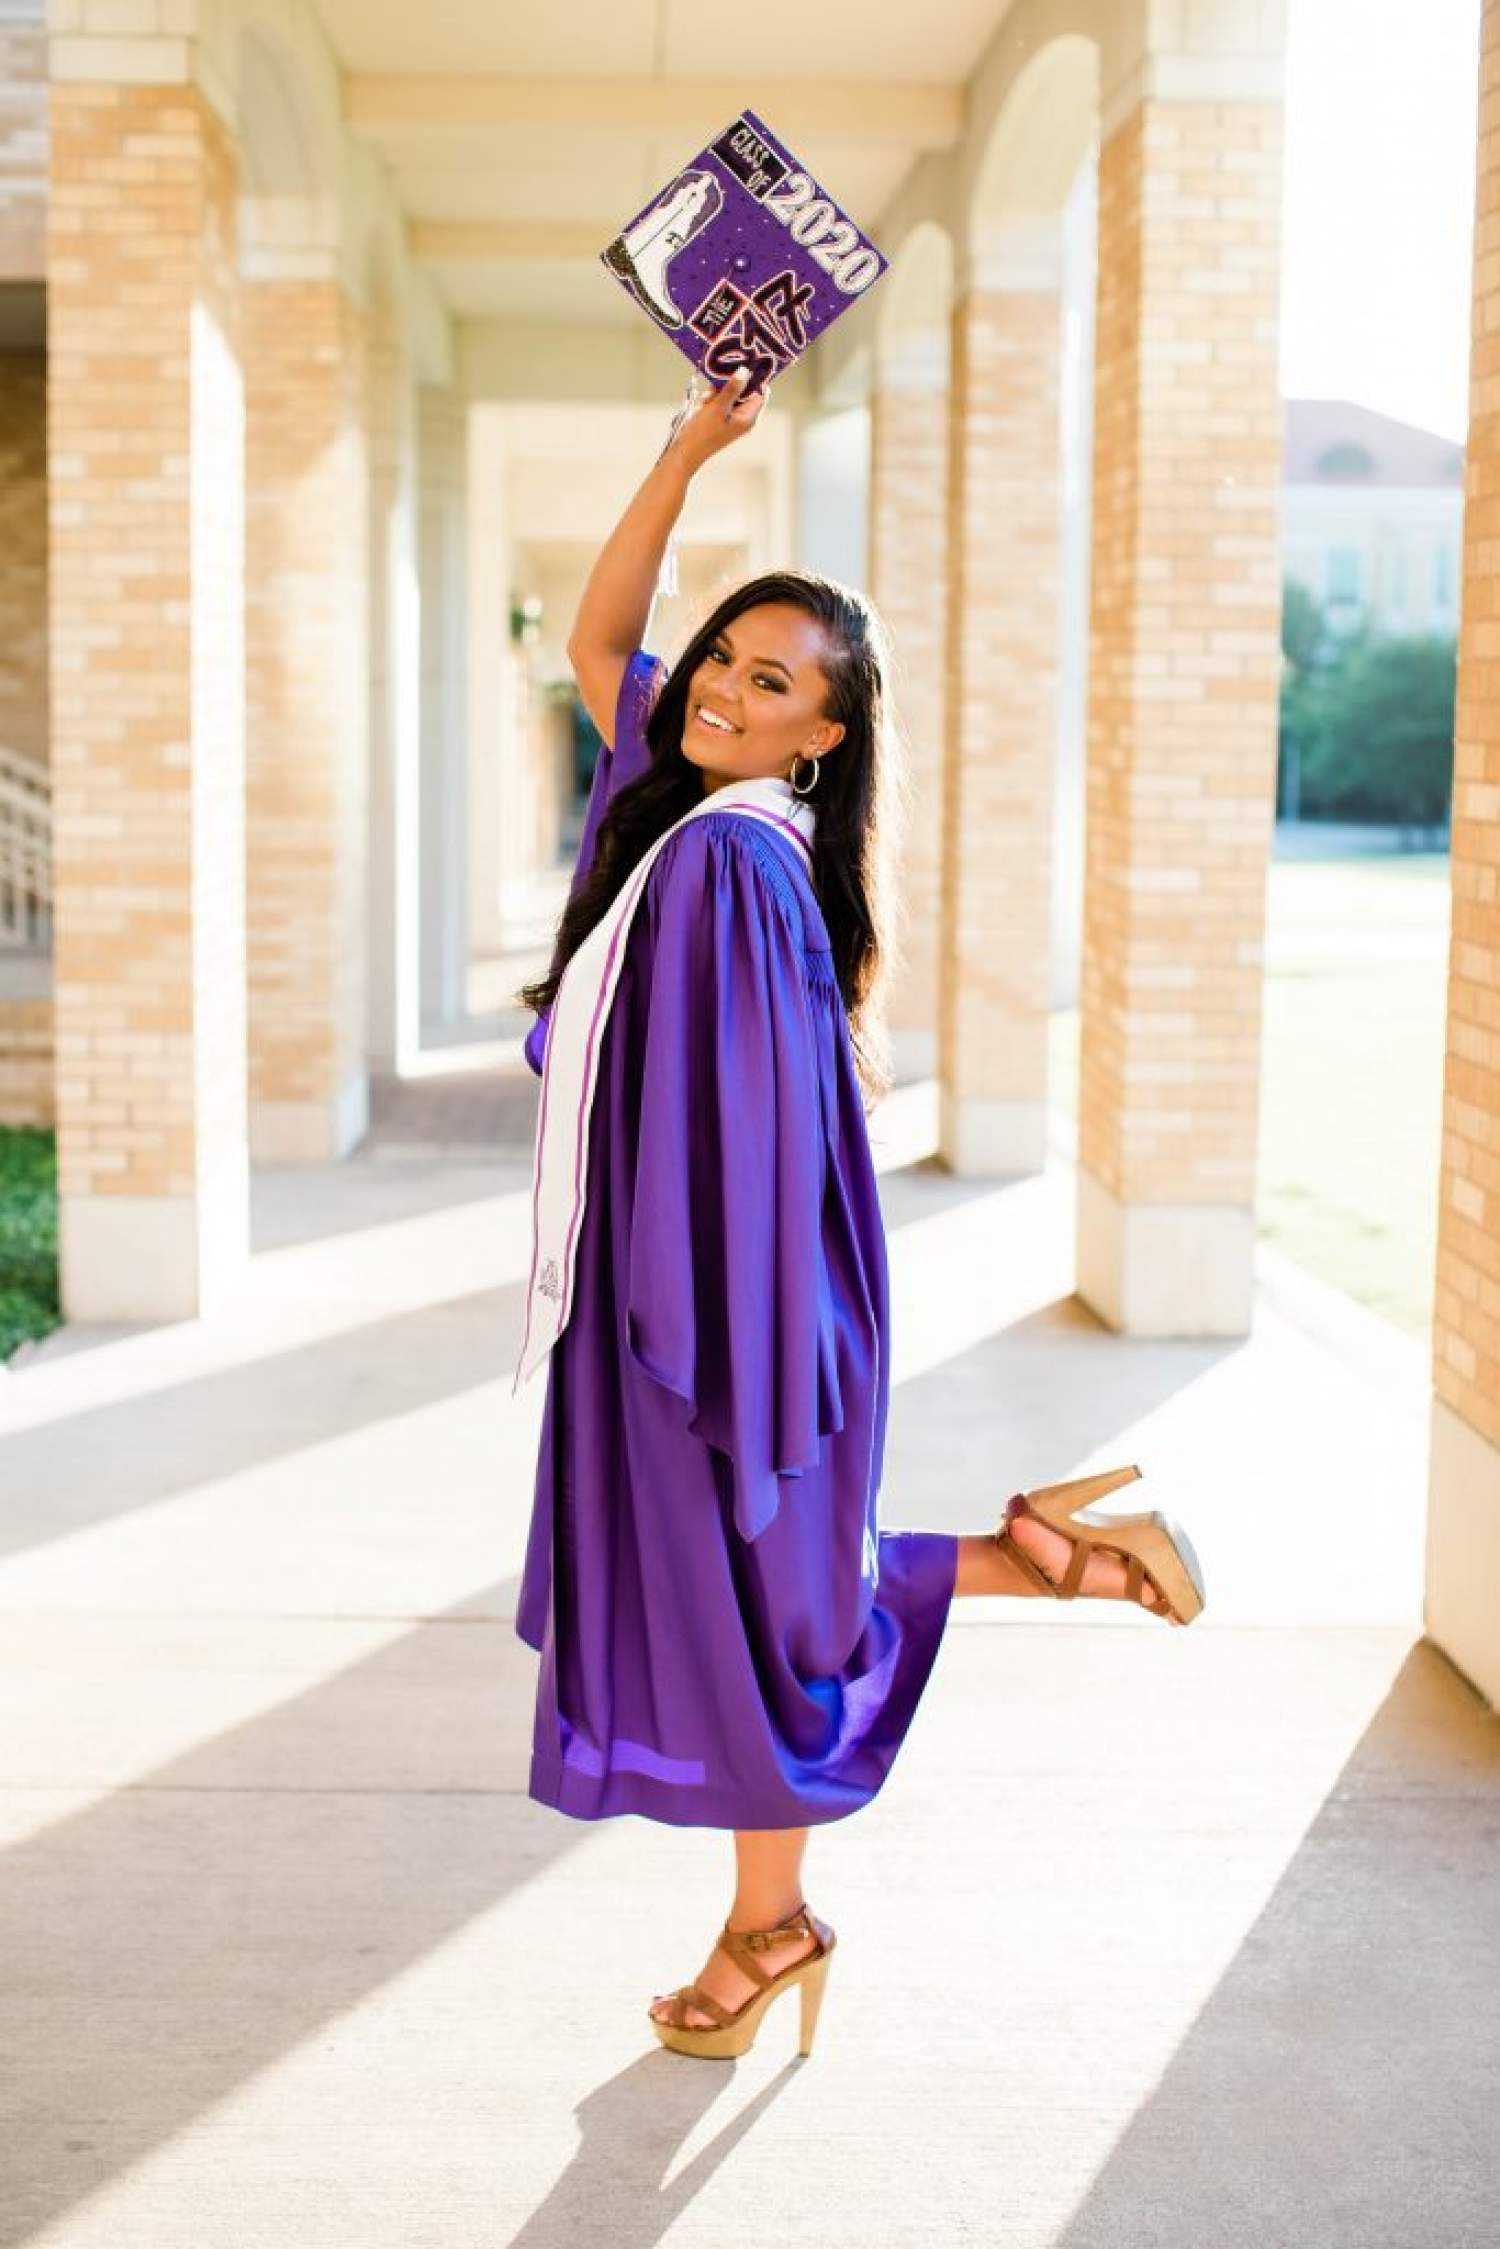 Olivia Moody posed for a picture in her graduation gown in the TCU Commons.